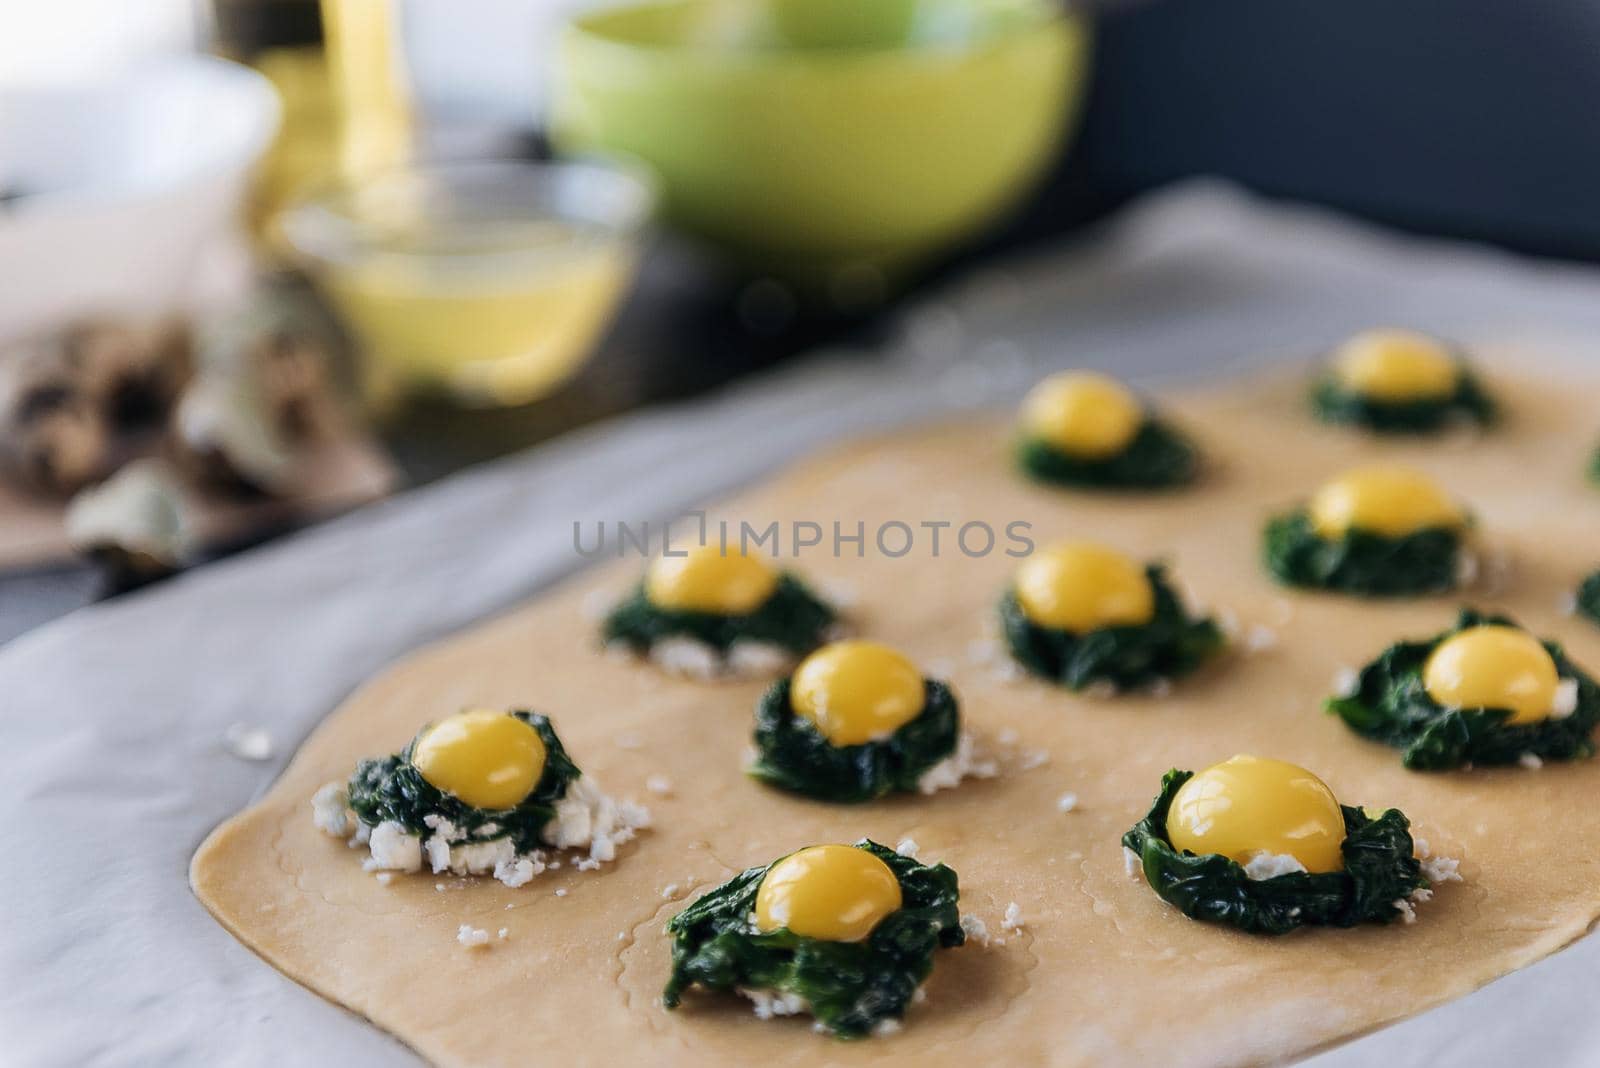 Step by step the chef prepares ravioli with ricotta cheese, yolks quail eggs and spinach with spices. The chef prepares the filling on the dough